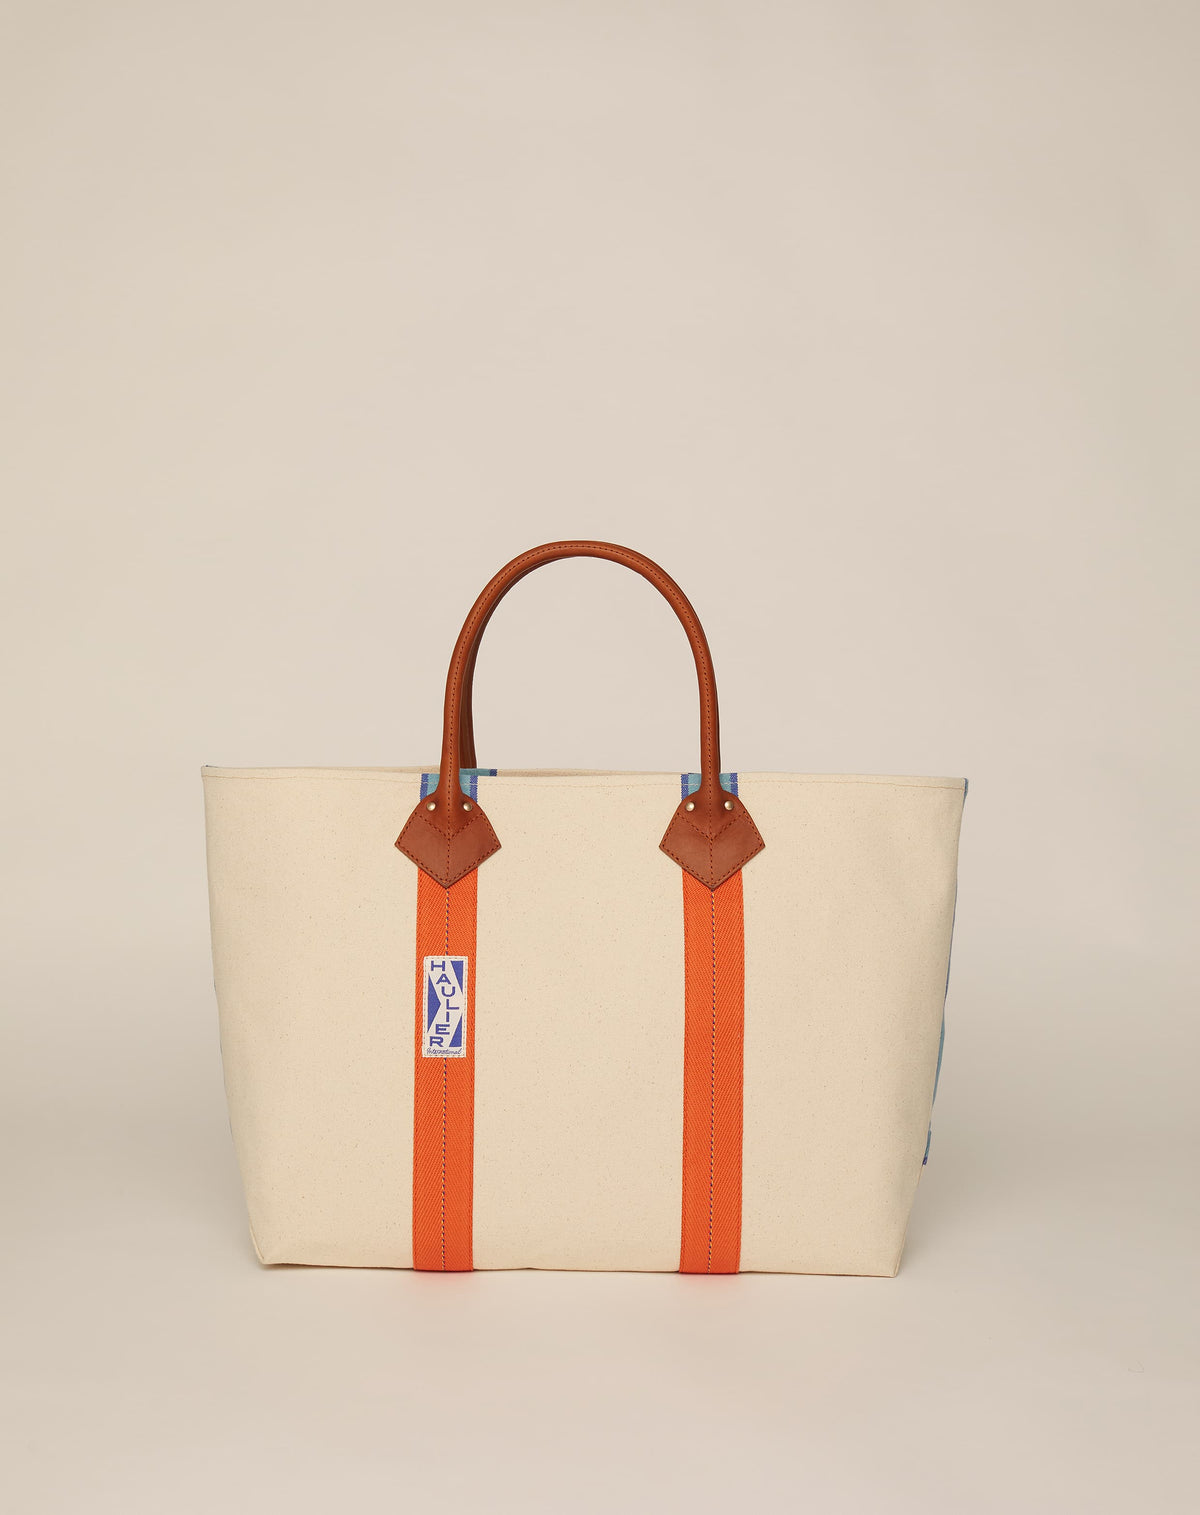 Image of classic canvas tote bag in natural ecru colour with leather handles and contrasting orange stripes.